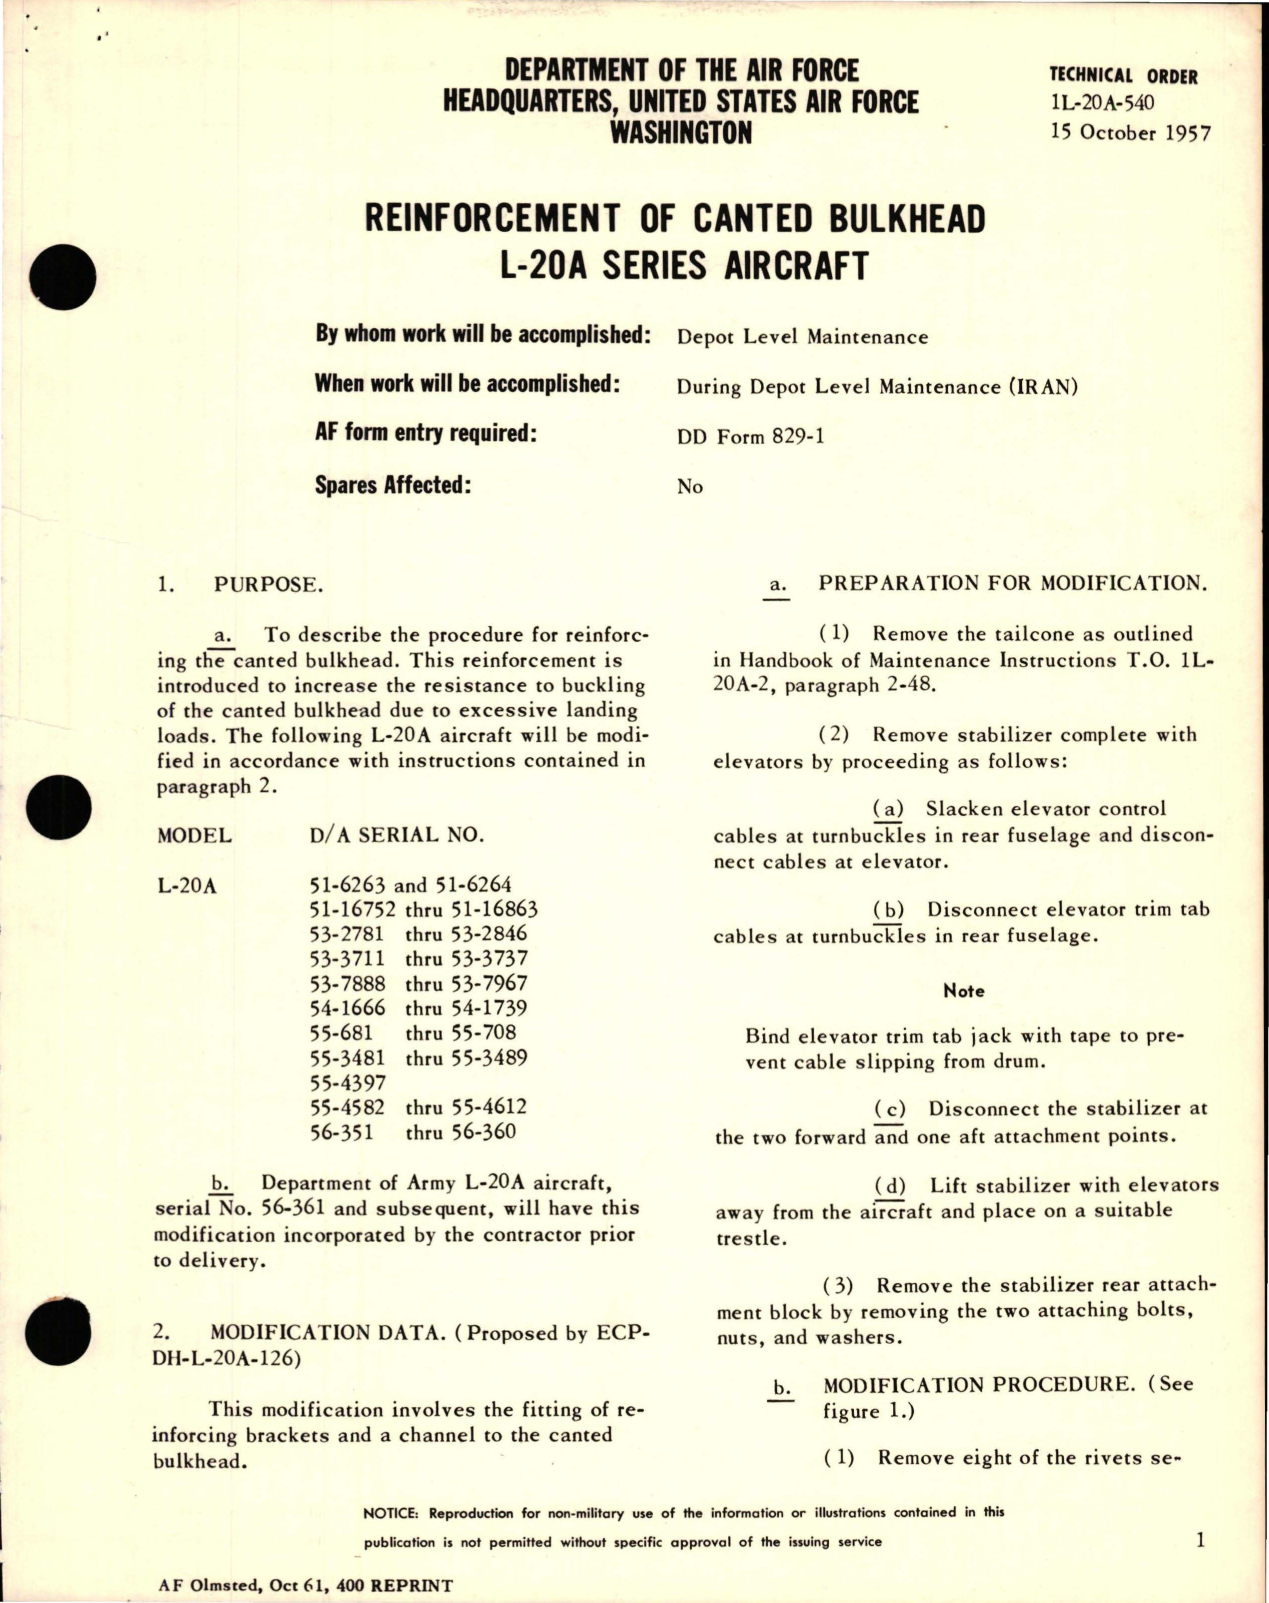 Sample page 1 from AirCorps Library document: Reinforcement of Canted Bulkhead - L-20 Series